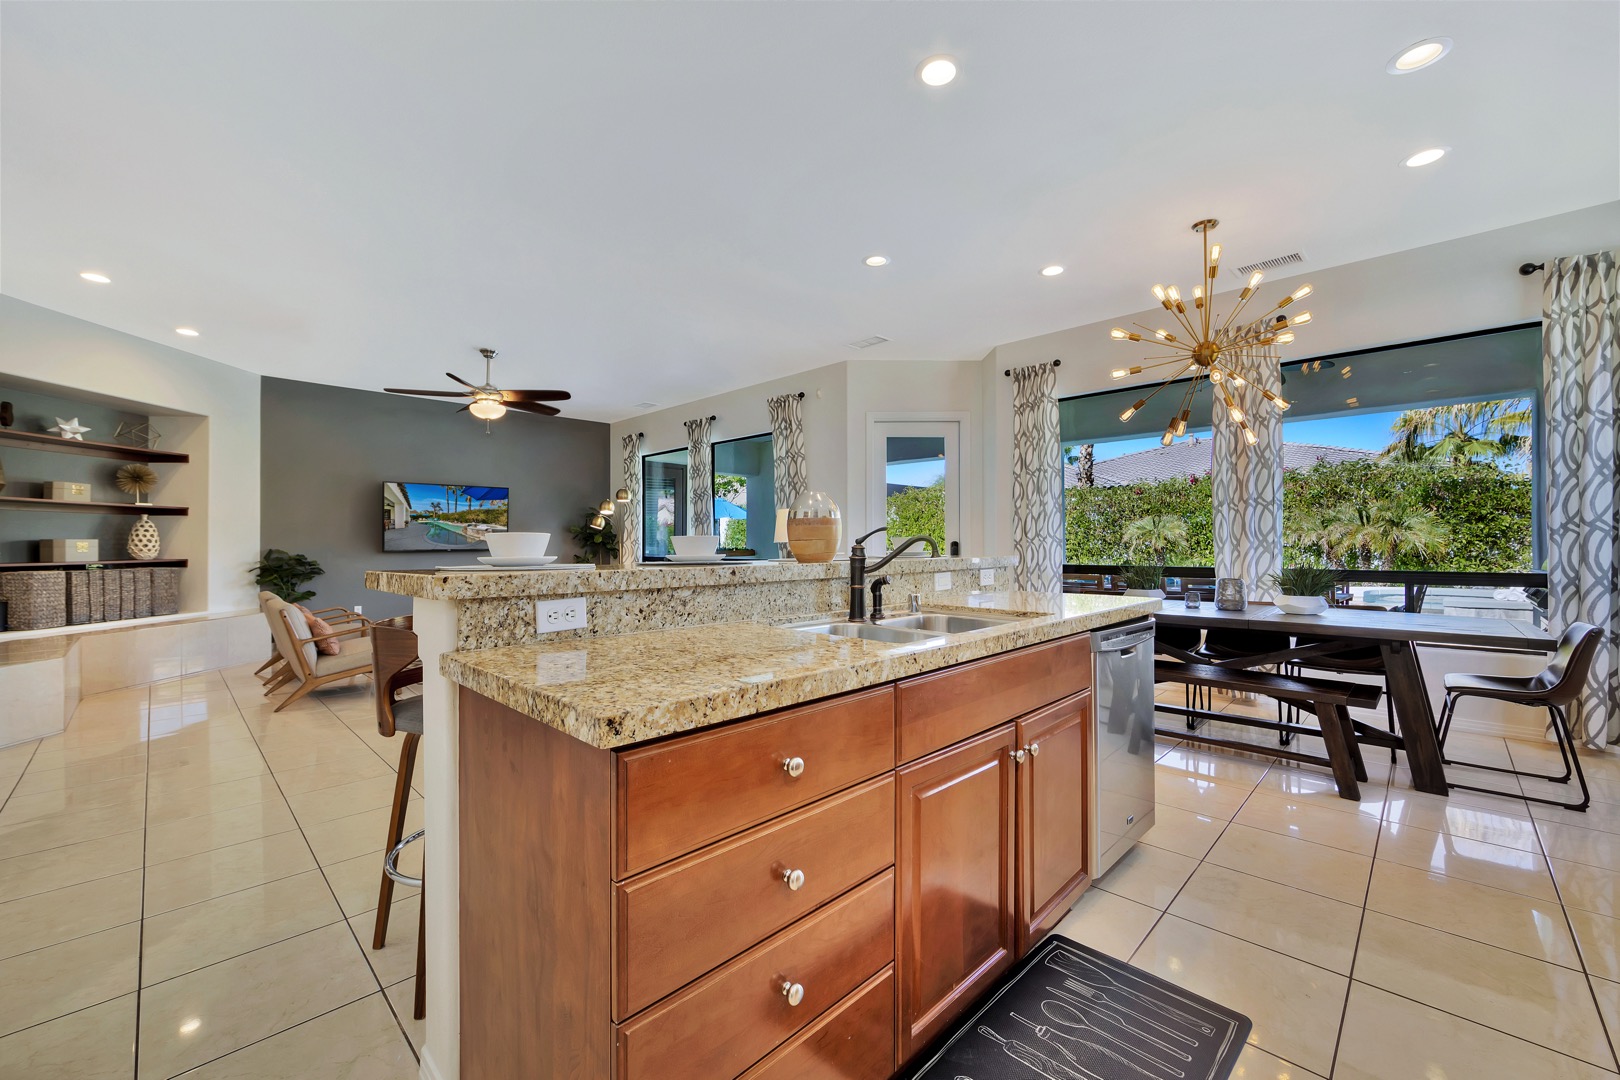 Convenient center island with sink and dishwasher